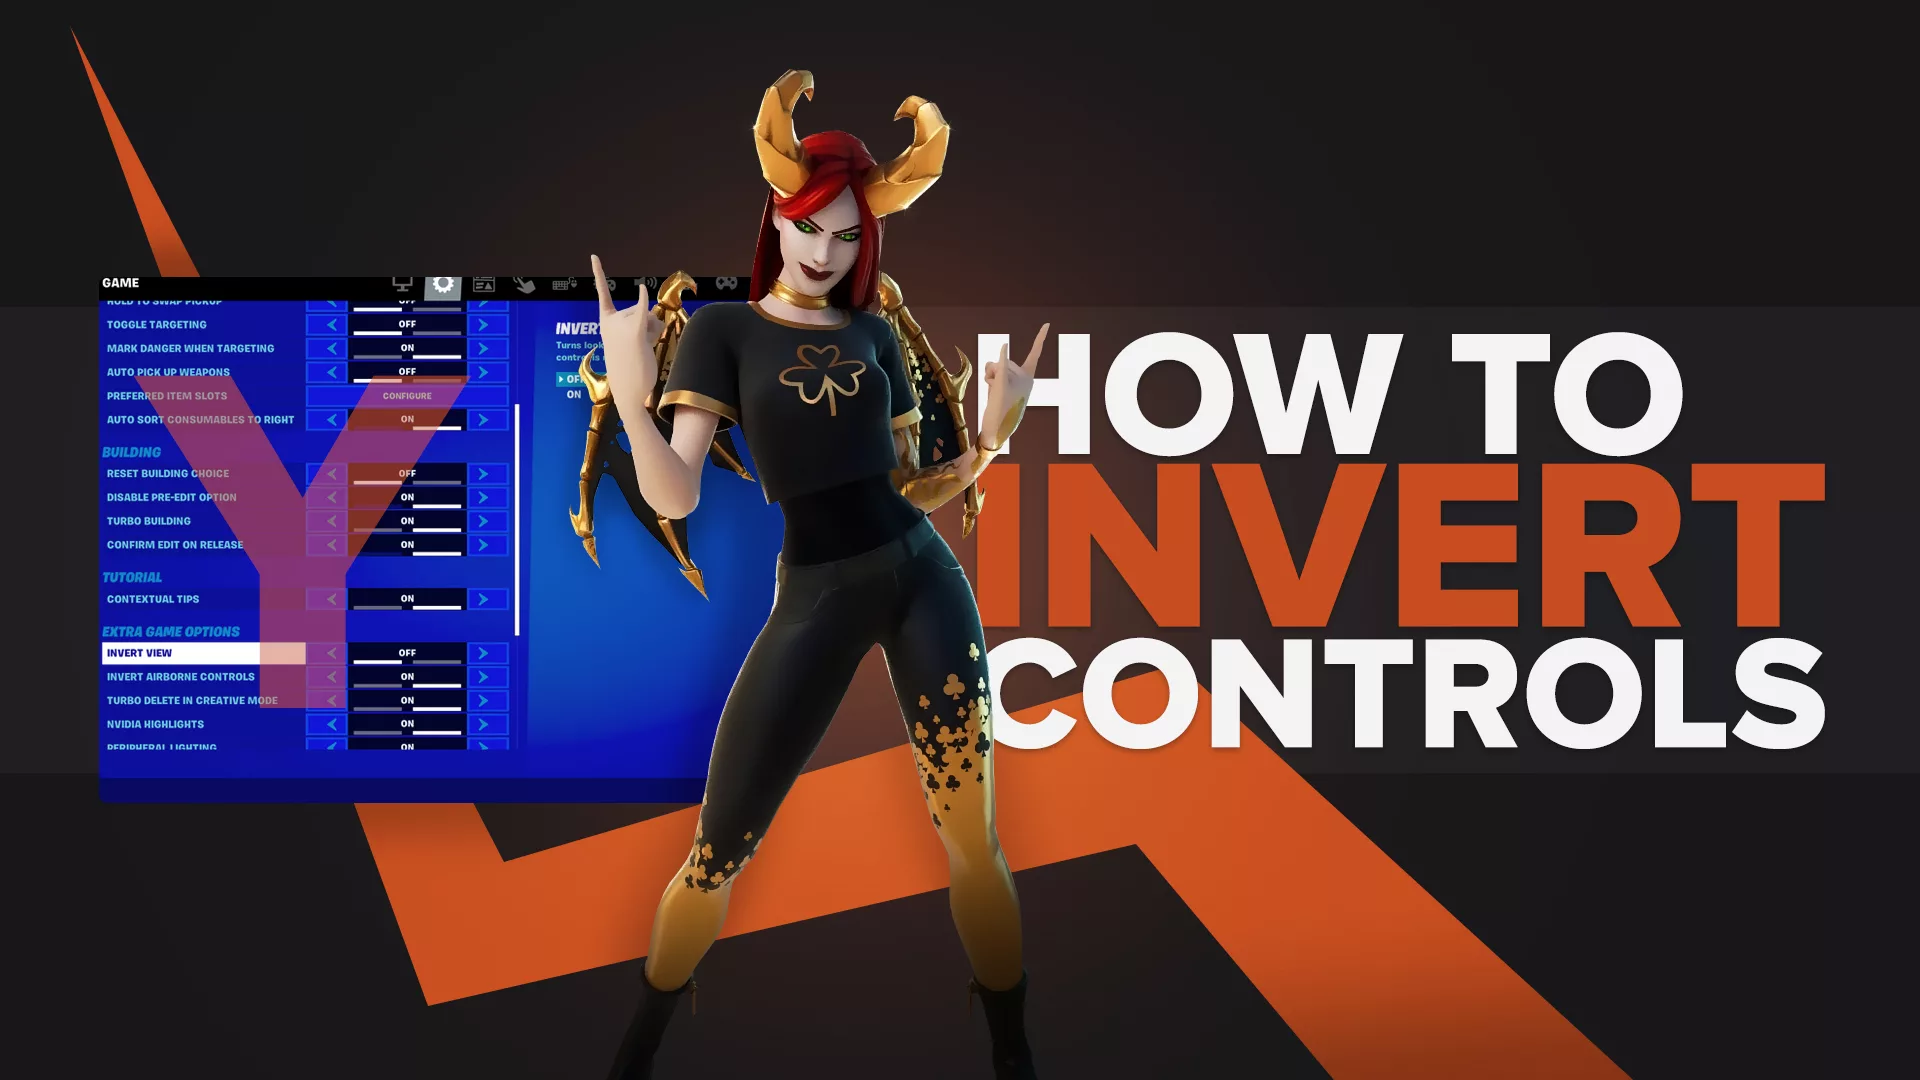 How To Invert Controls on Fortnite